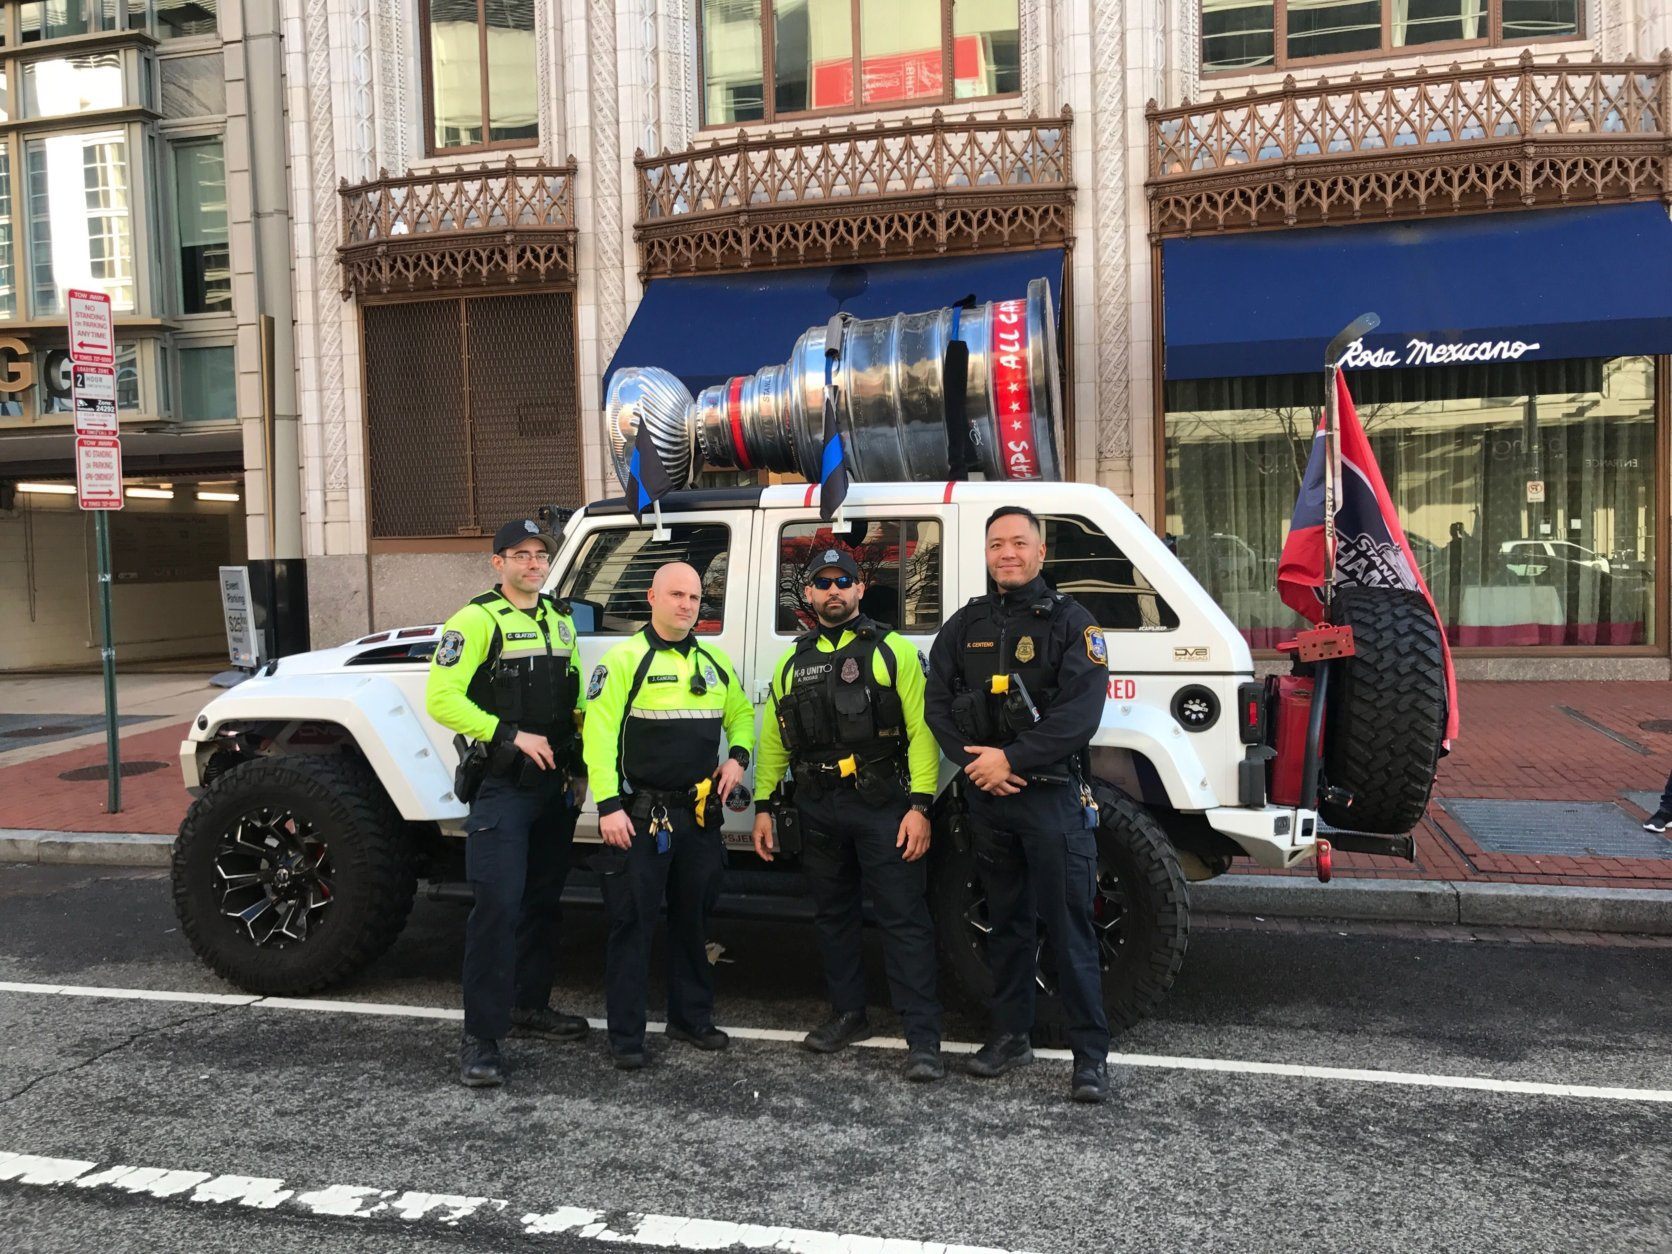 Police pose in front of the famous Caps Jeep. (Courtesy Ed Twomey) 